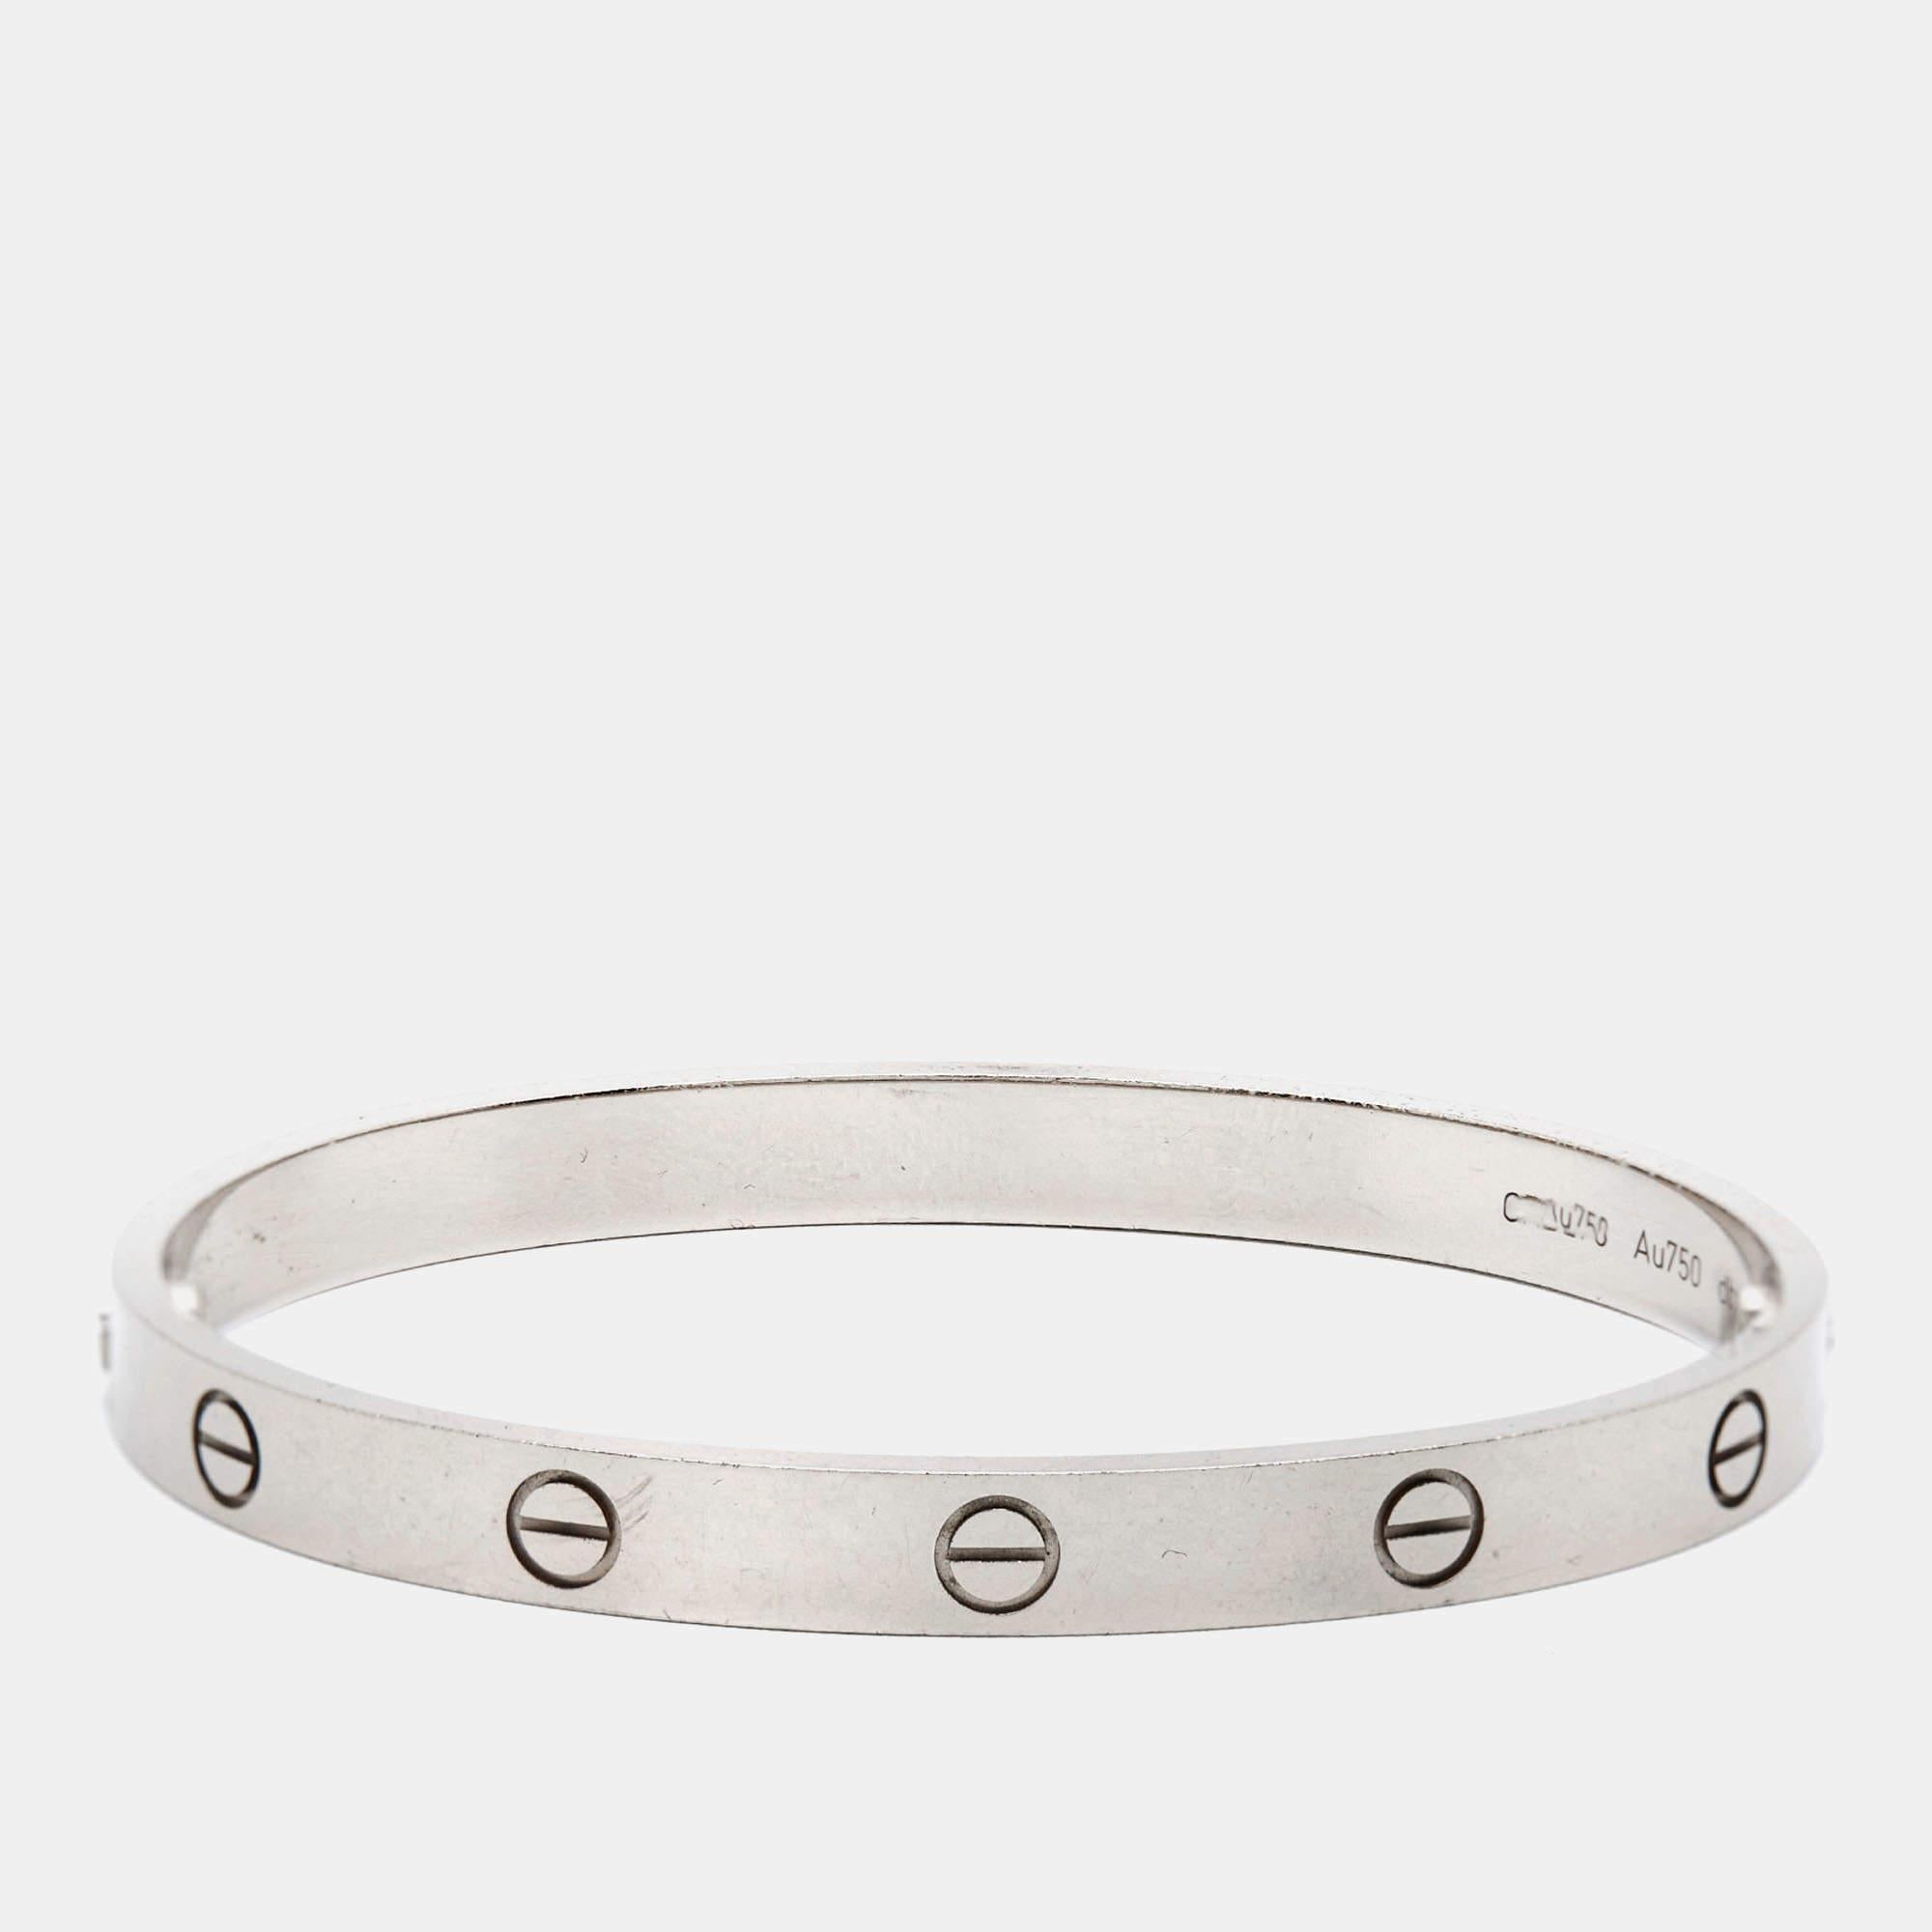 Cartier's Love bracelet is a modern symbol of luxury and a way to lock in one's love. Designed in an elegant shape to comfortably sit around your wrist, the iconic love handcuff is laid with distinct screw motifs and secured by screw closure. This